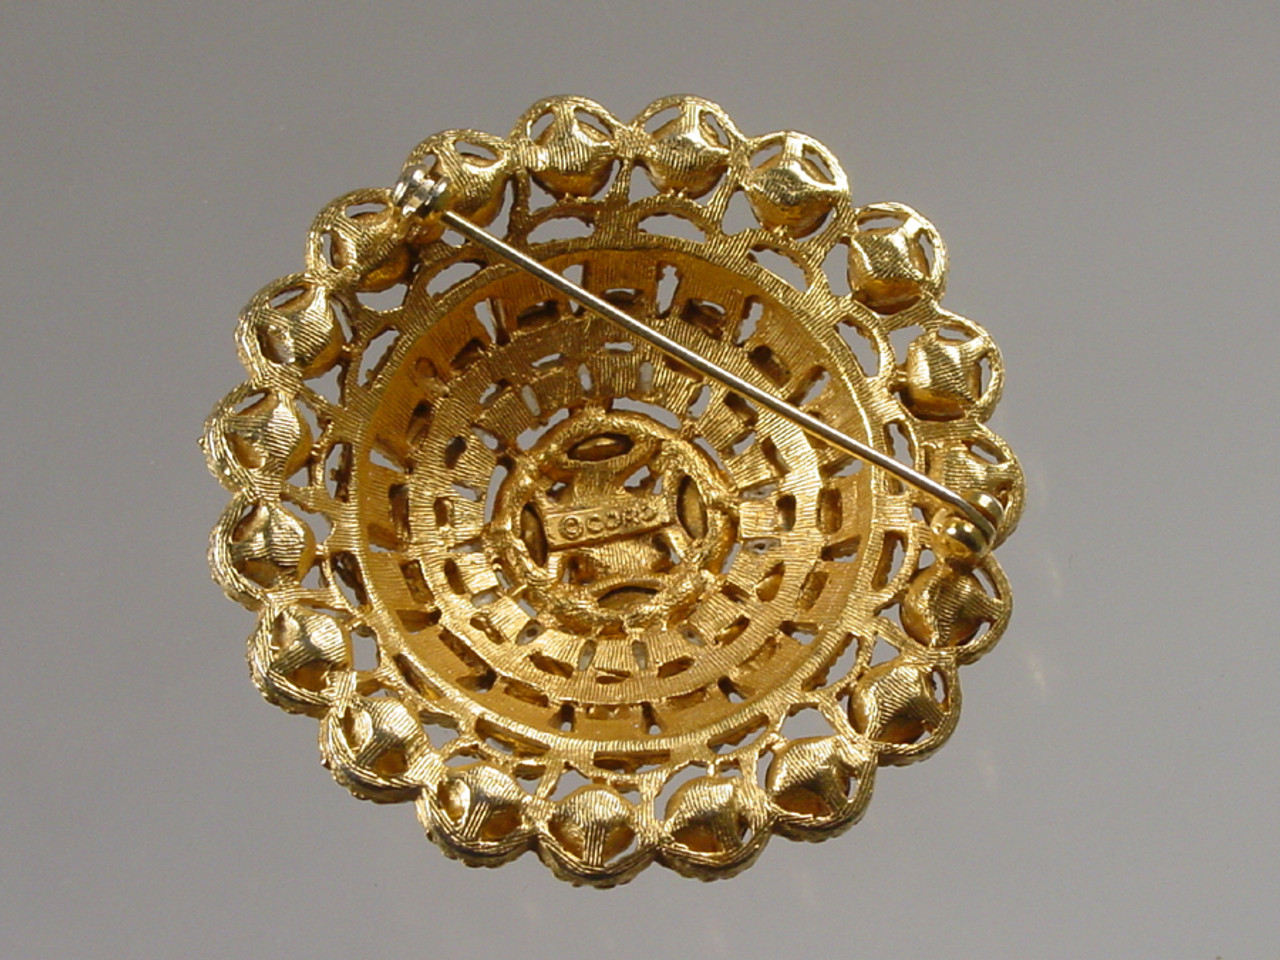 Signed Coro on back of brooch